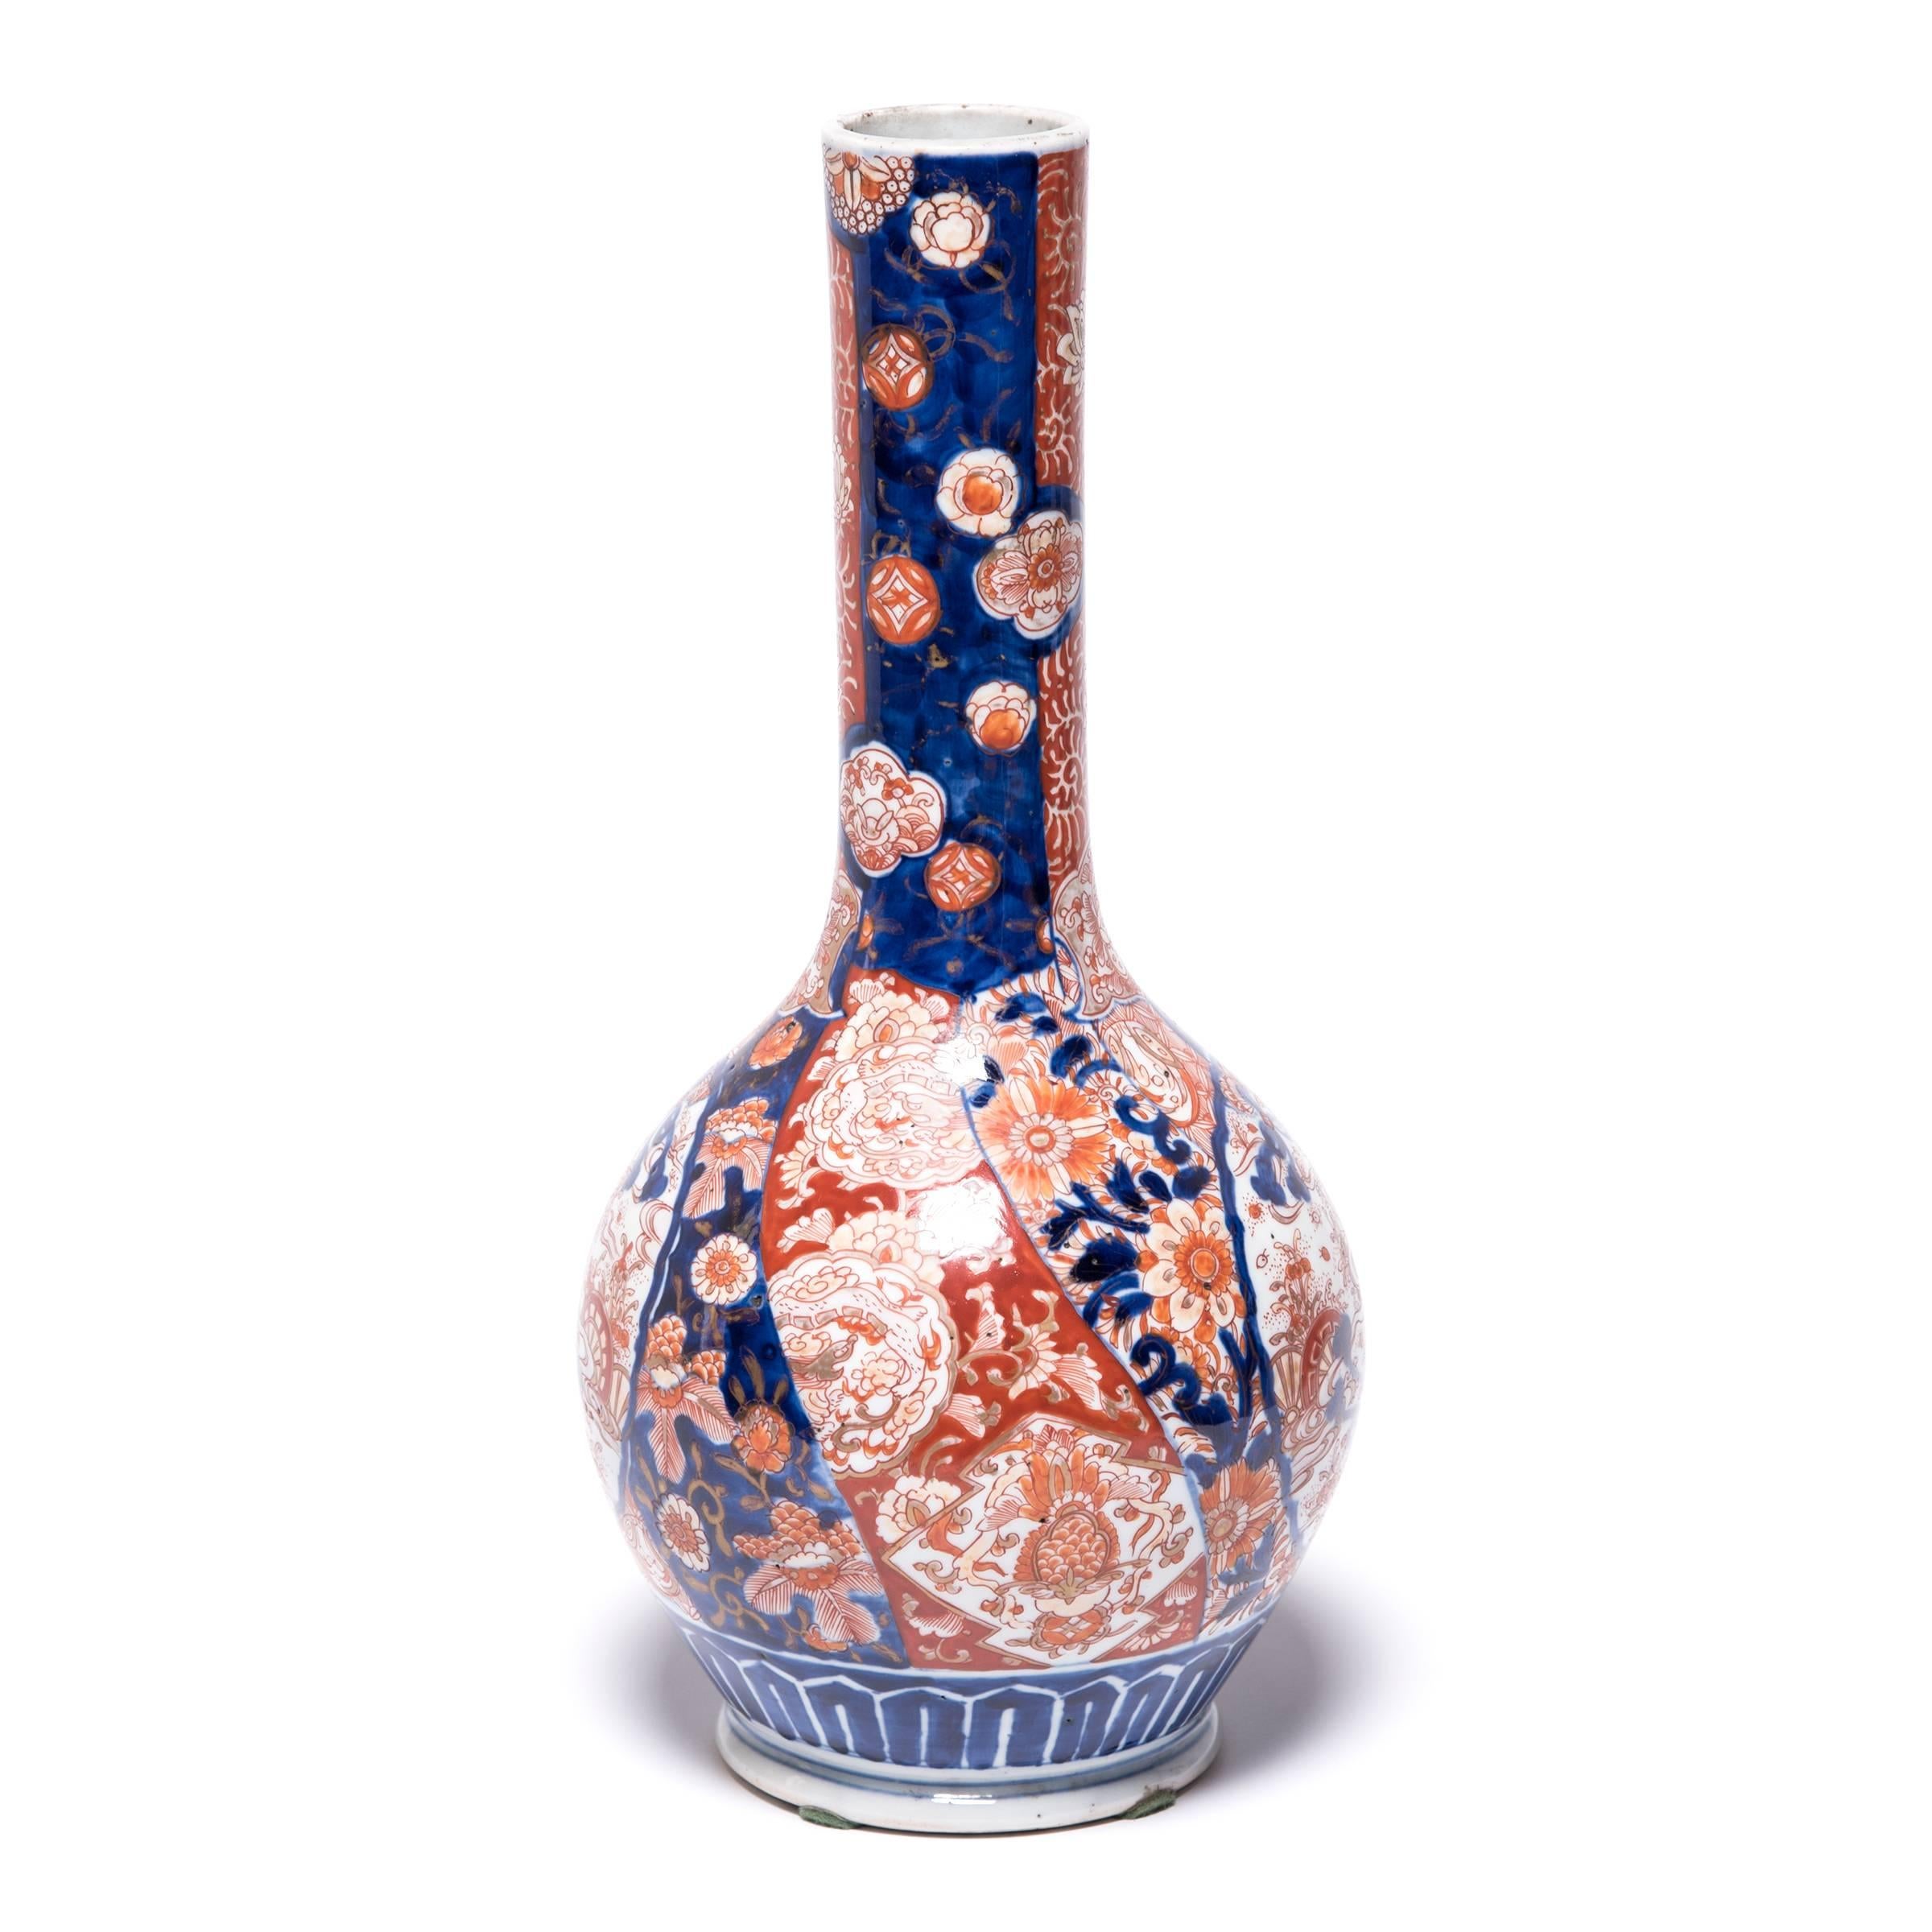 The Meiji period (1868–1912) in Japan saw a revival of many traditional art forms, including the Imari Porcelain style demonstrated by this exquisite pair of bottleneck vases. Named after the Japanese port from which these ceramics were shipped to